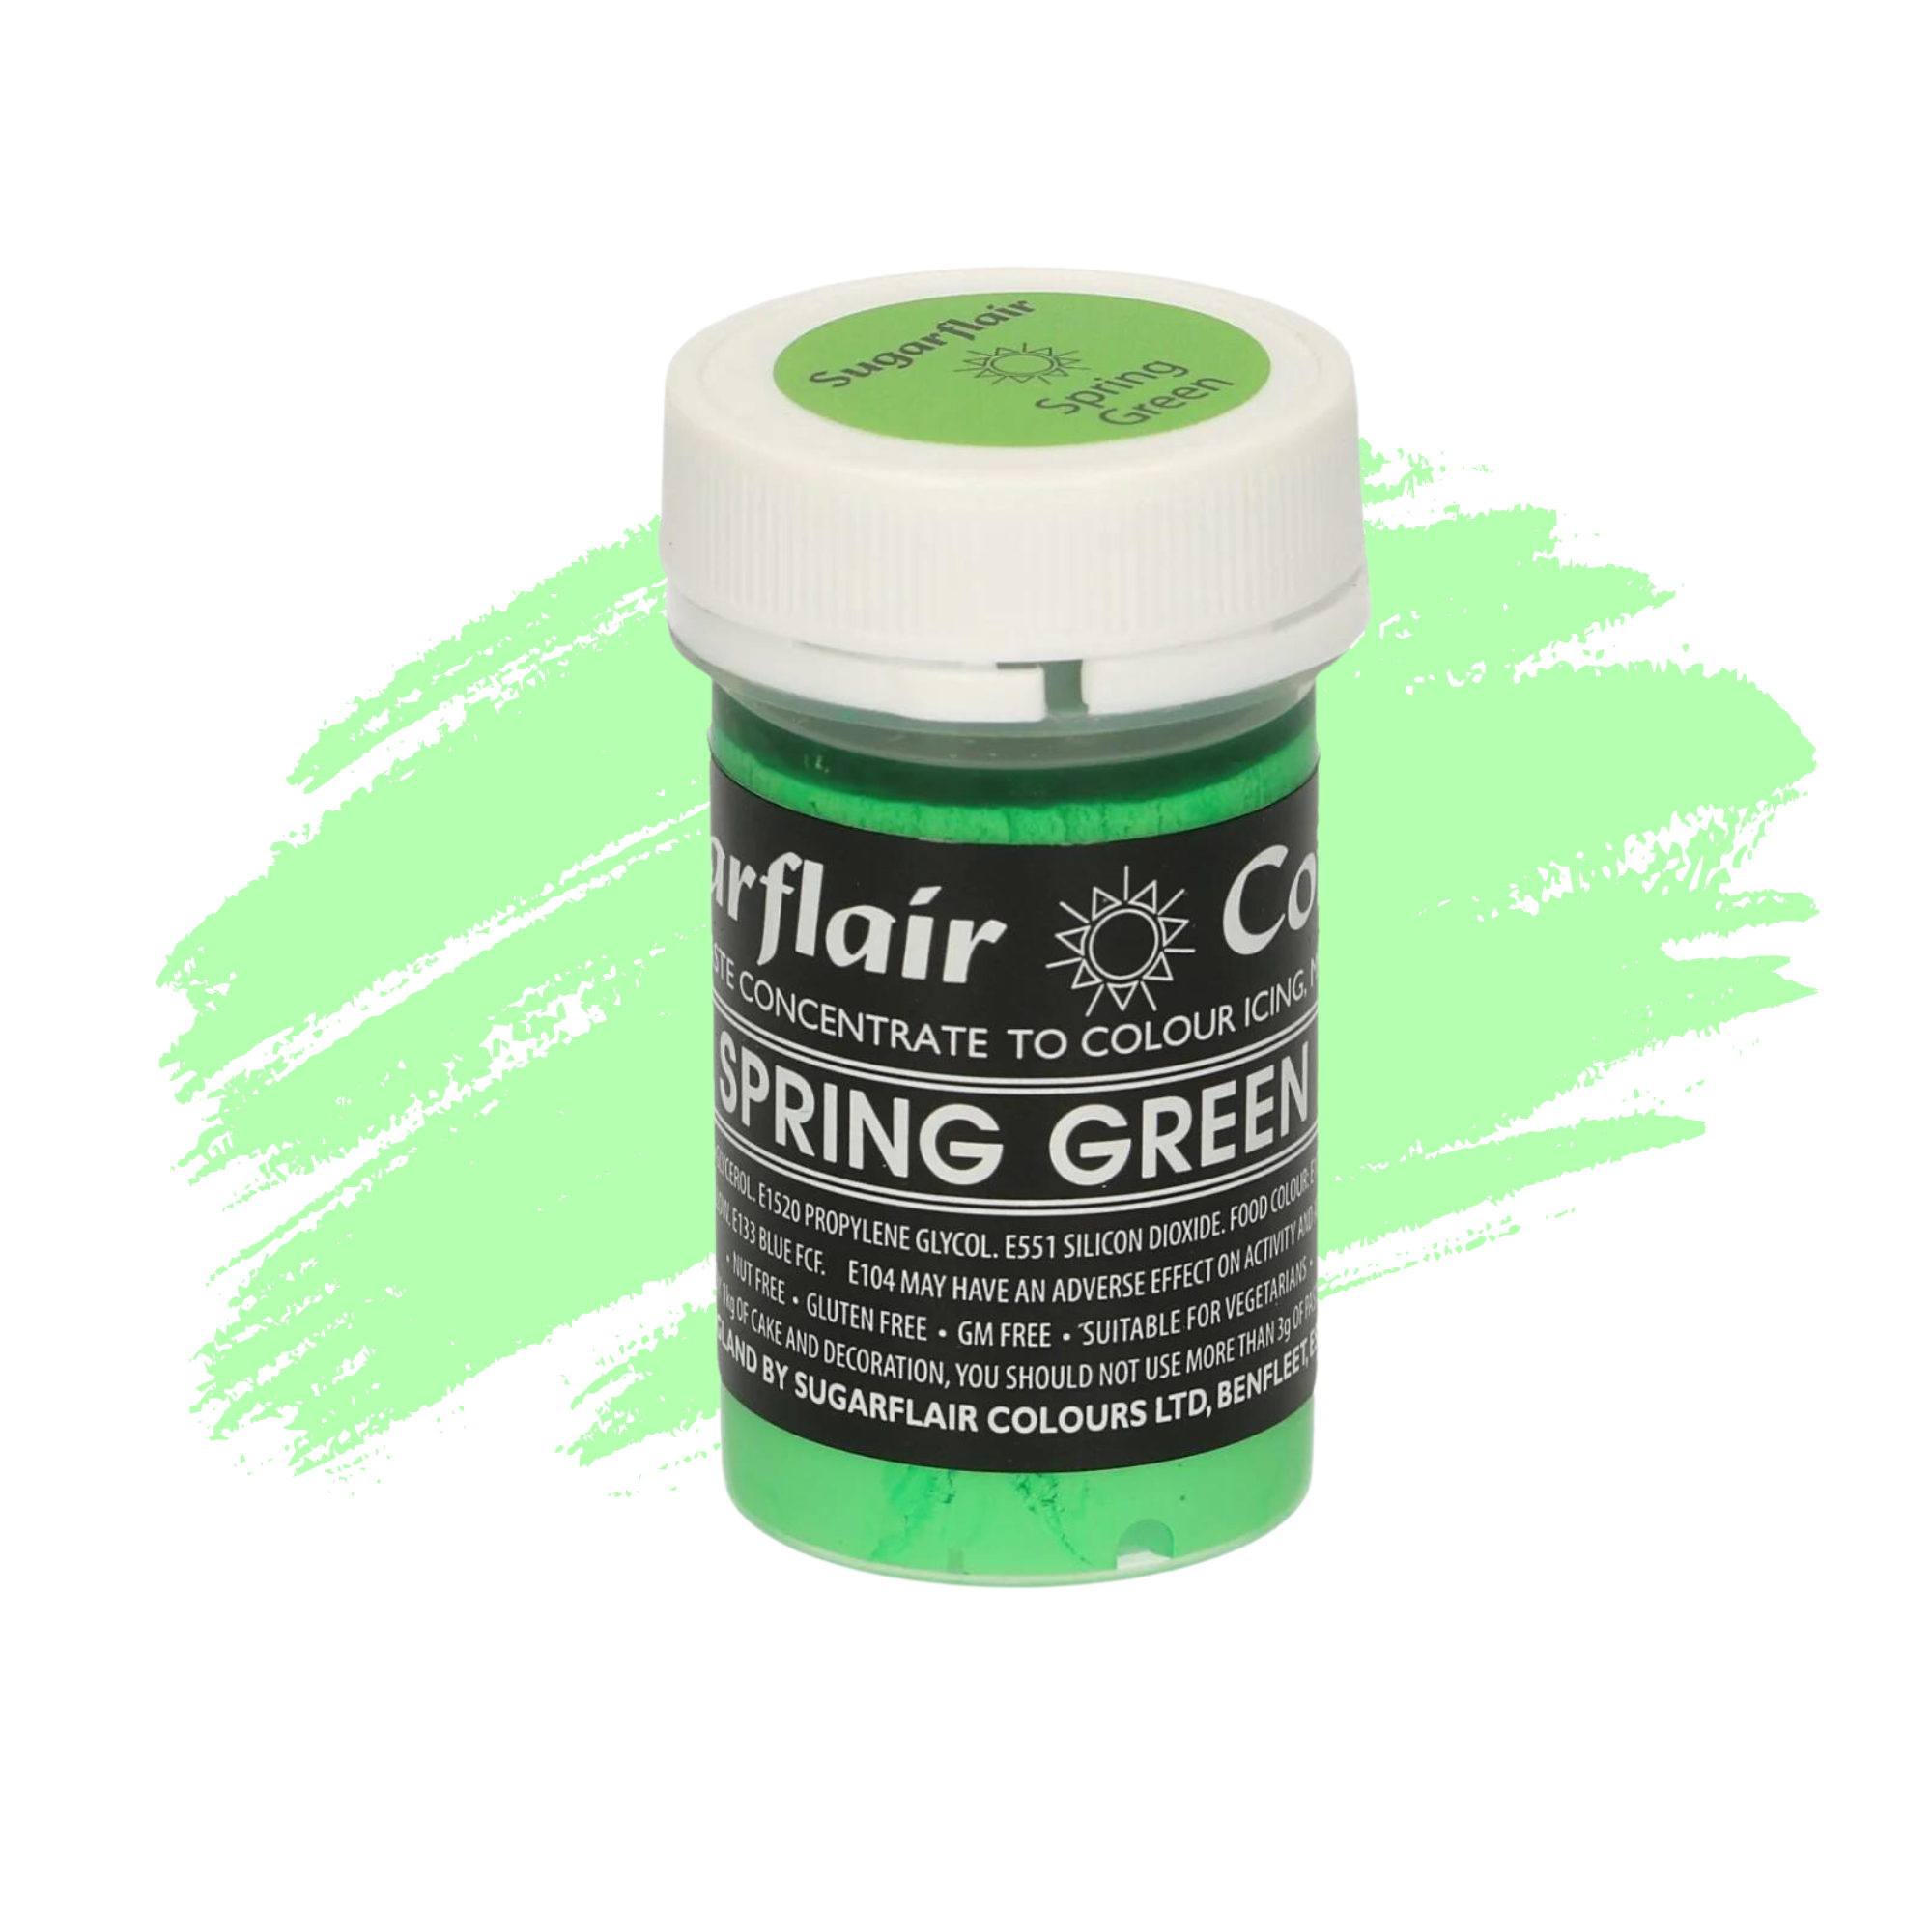 Sugarflair Paste Colours Concentrated Food Colouring - Pastel Spring Green - 25g